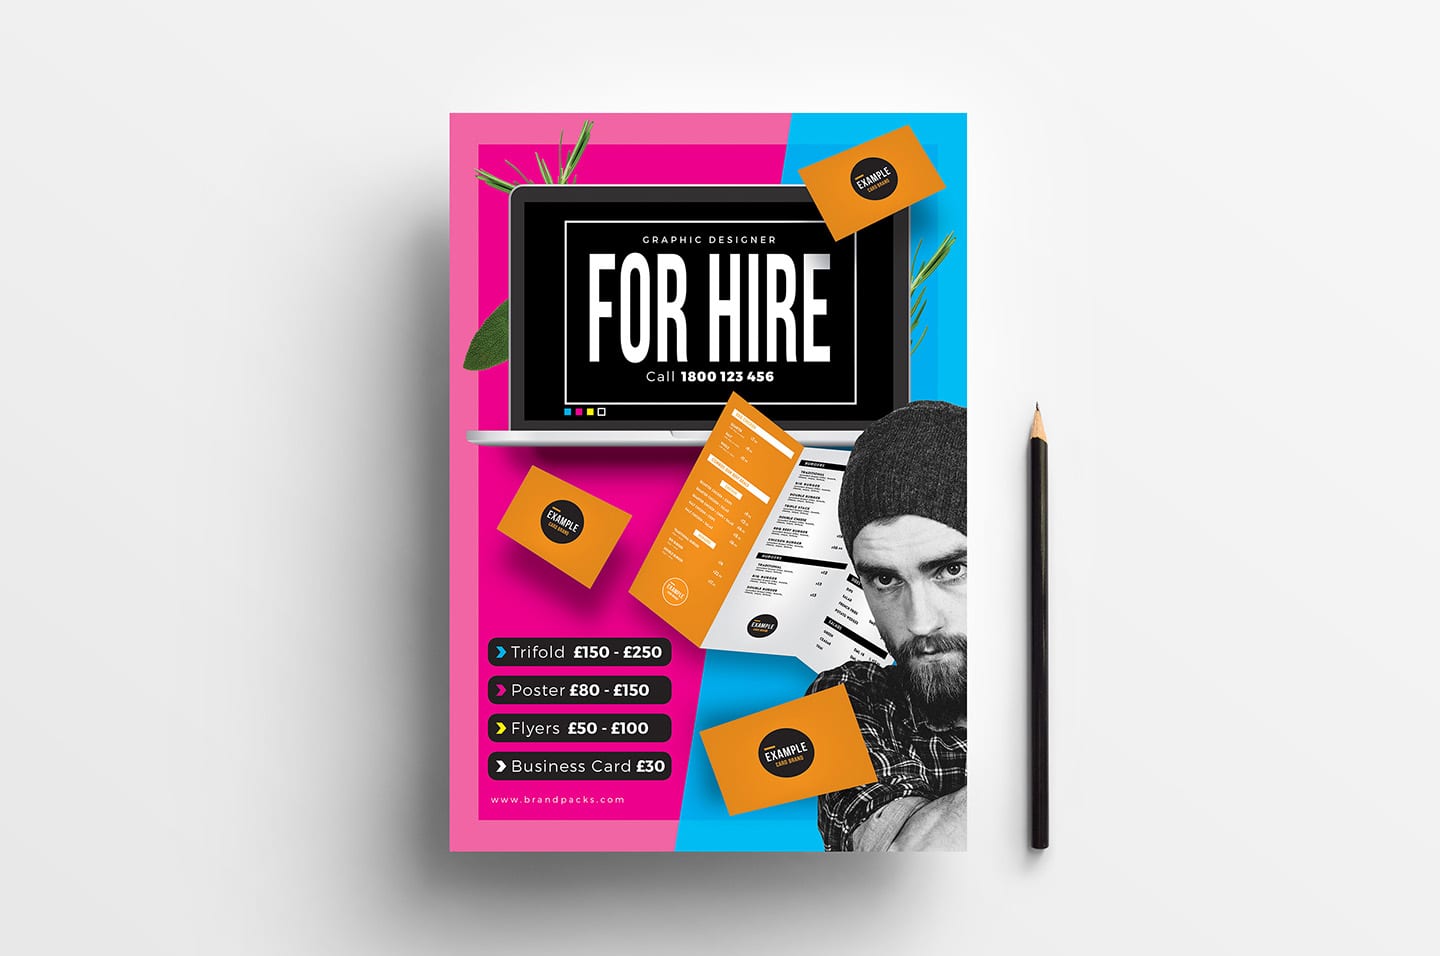 Freelance Graphic Designers For Hire